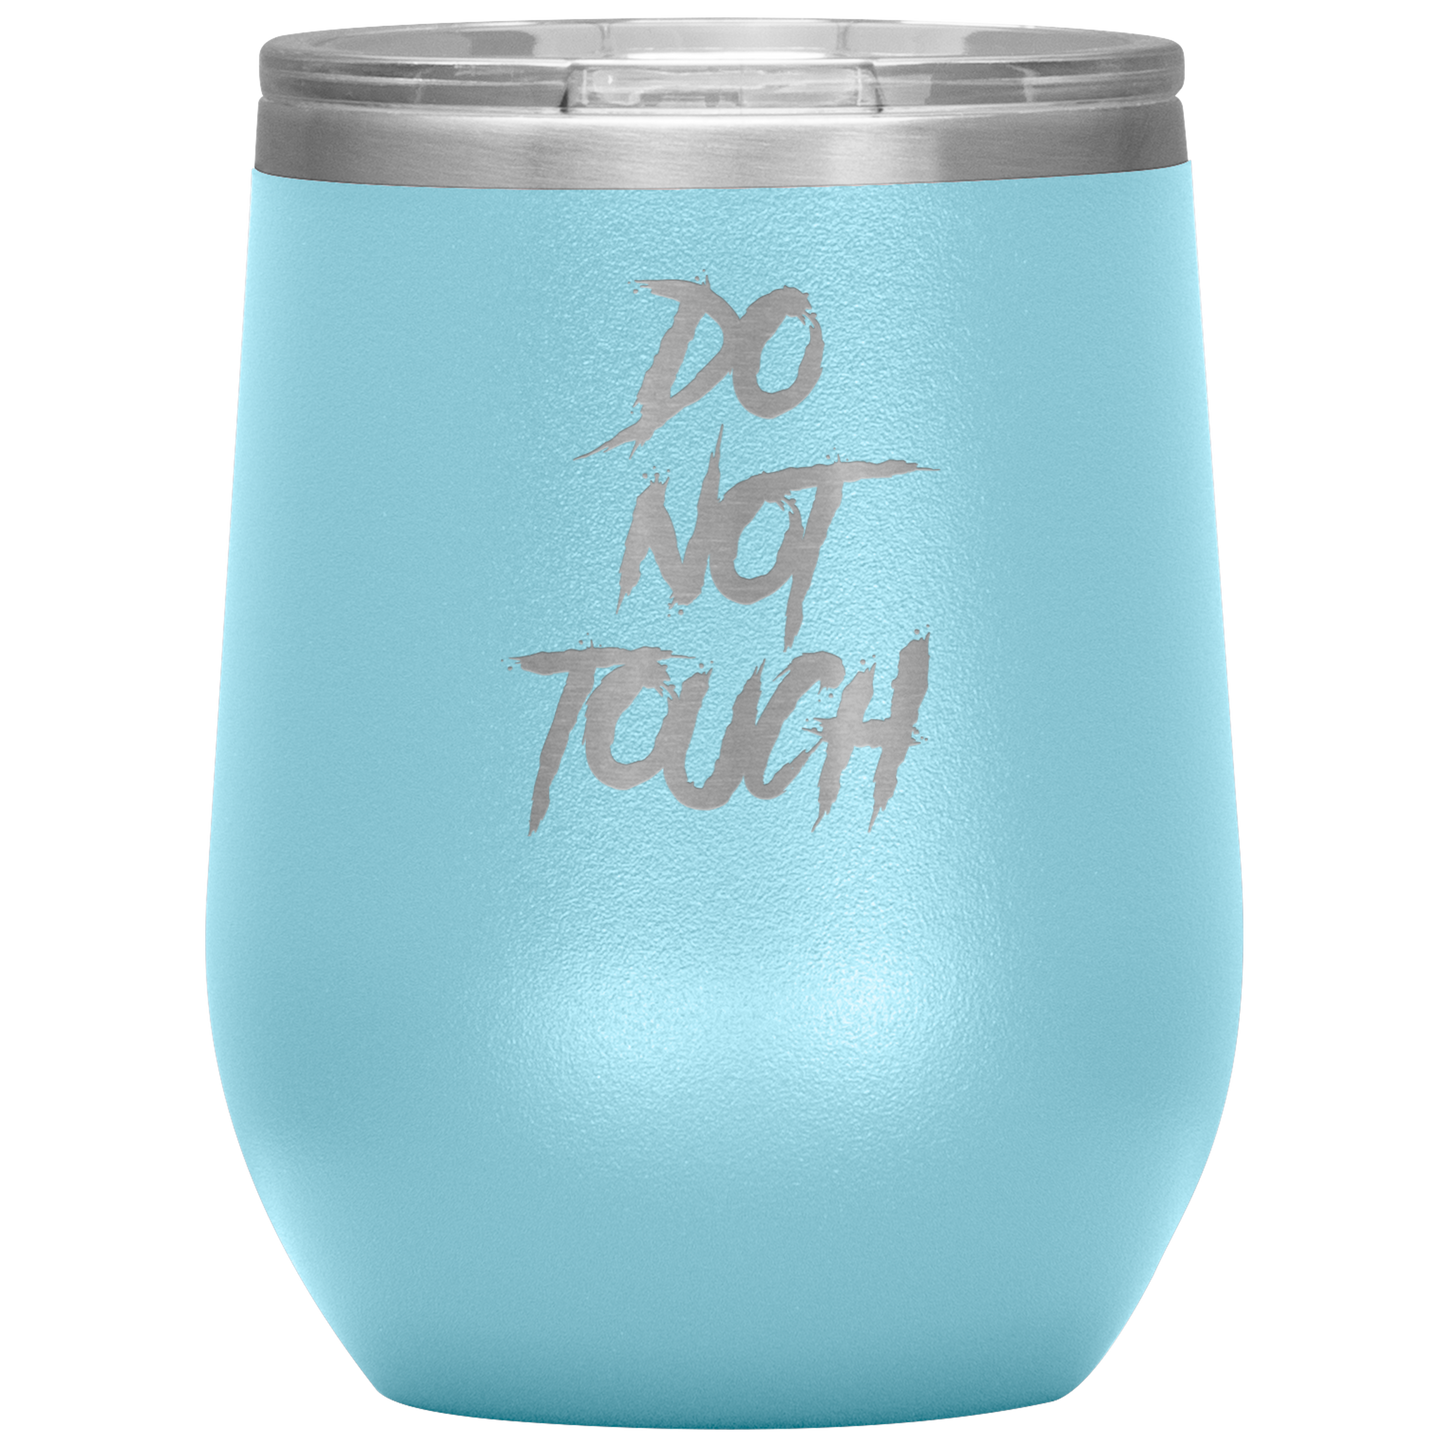 DO NOT TOUCH WINE TUMBLER